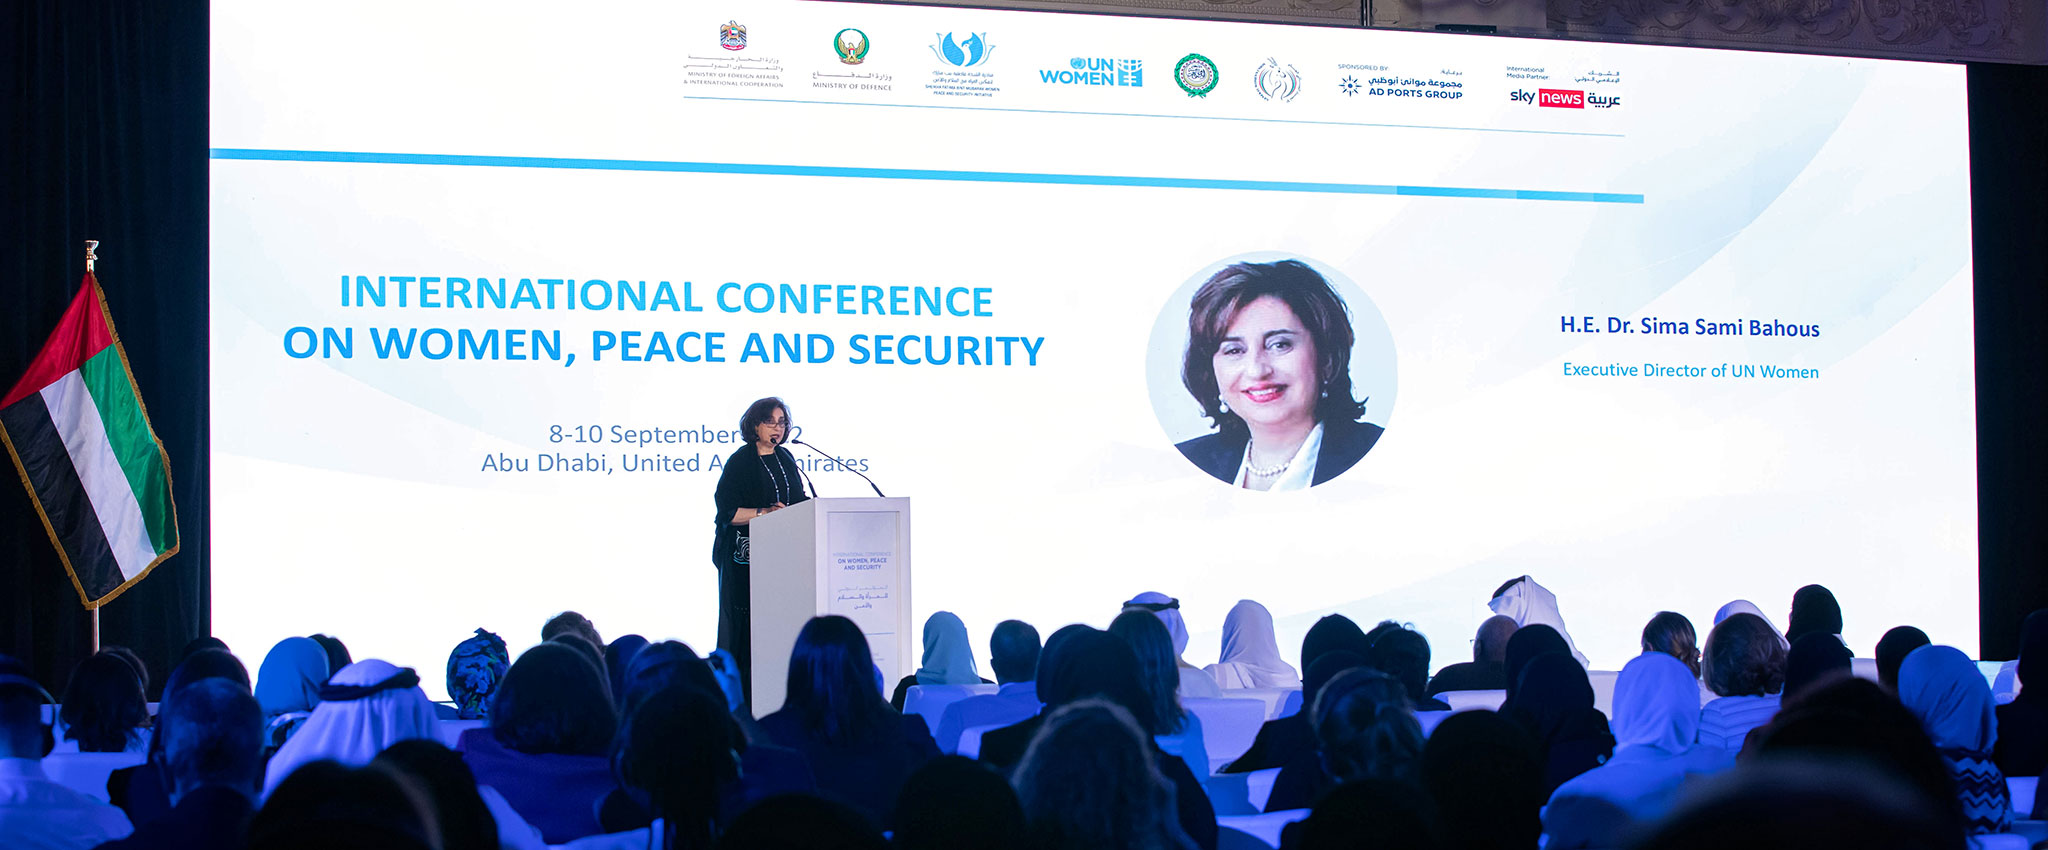 UN Women Executive Director Sima Bahous delivers remarks at the International Conference on Women, Peace and Security in Abu Dhabi on 8 September 2022. Photo: UN Women/Saroj Khadka 